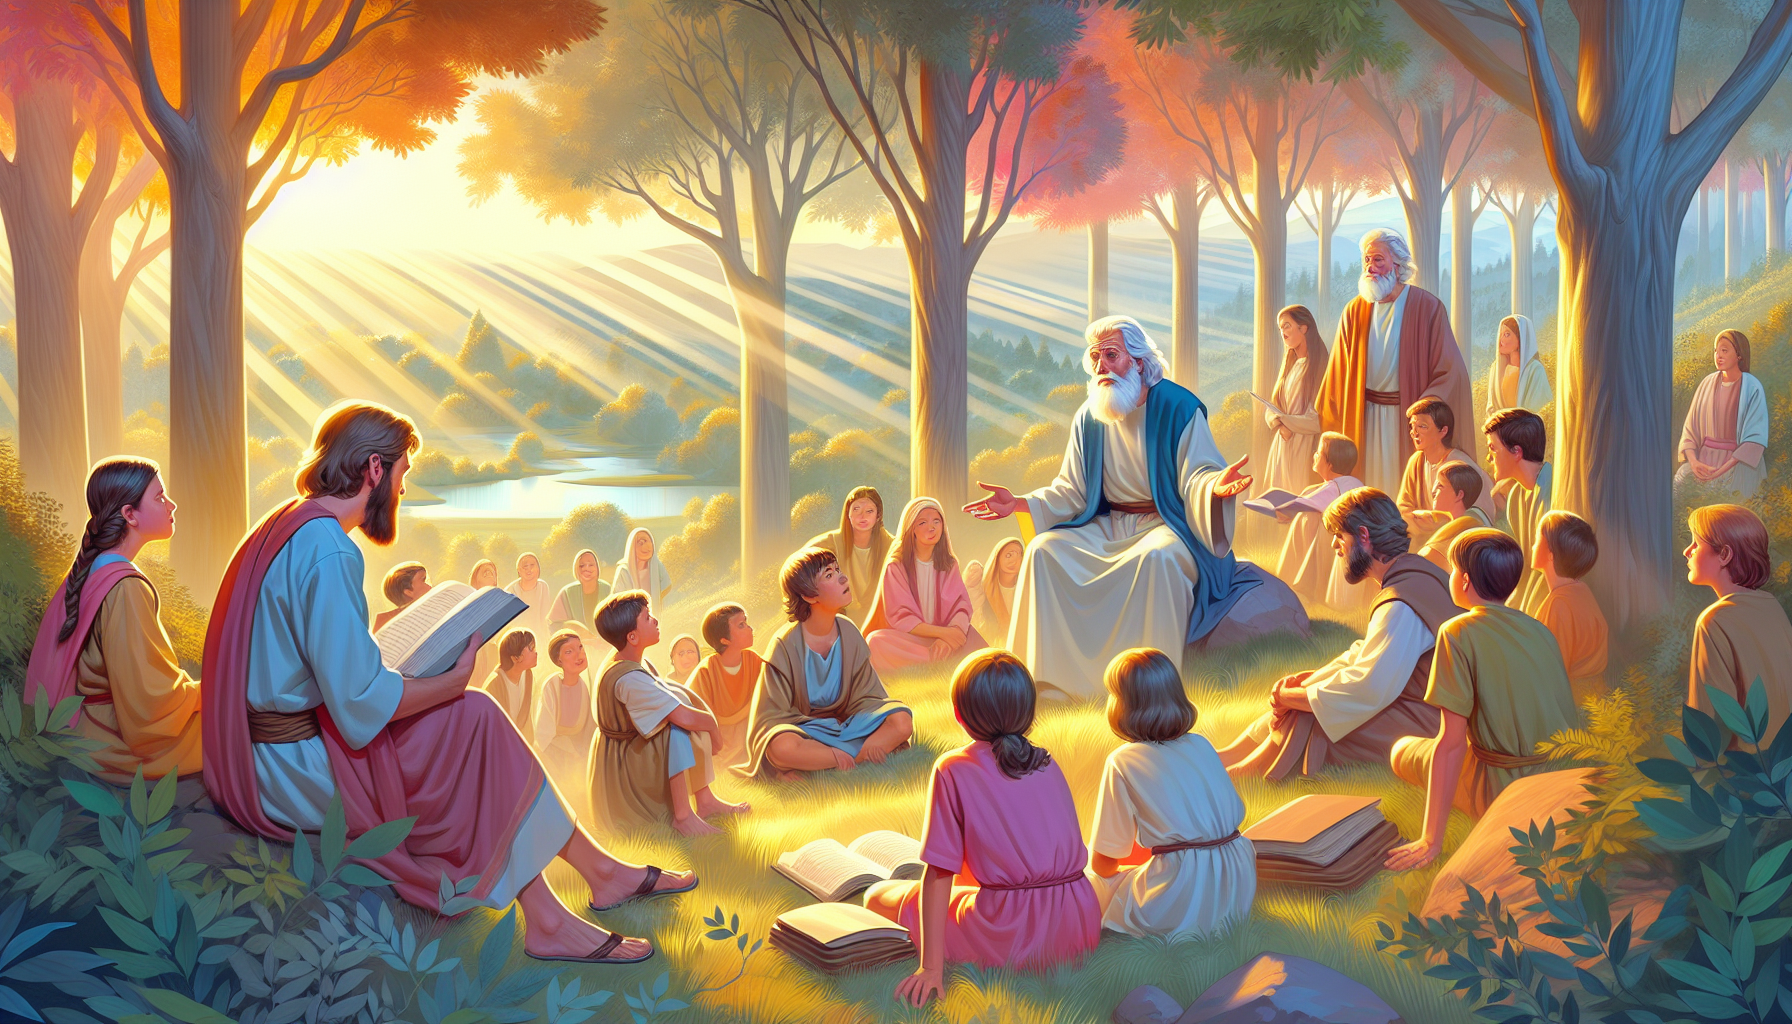 Illustration of Matthew 18:1-5, showing Jesus surrounded by His disciples and children, emphasizing humility and the importance of becoming like little children to enter the Kingdom of Heaven. The set